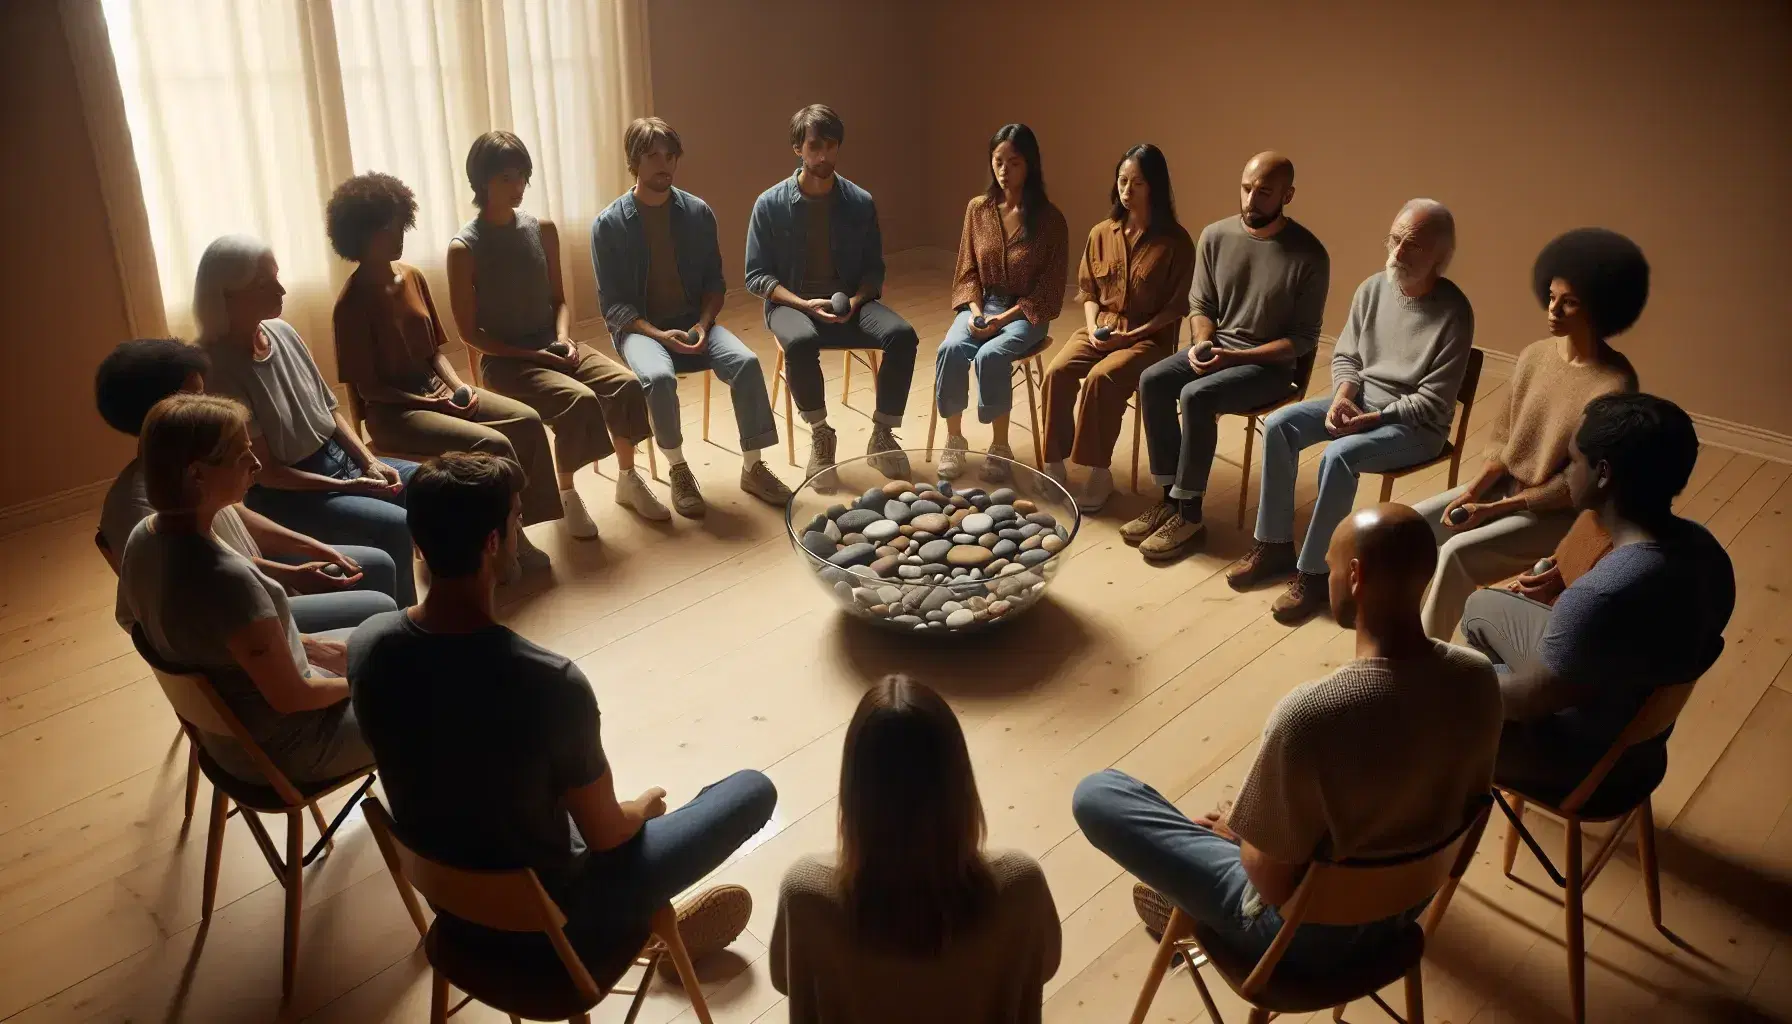 Diverse group in a circle participating in a communal stone-placing ritual, reflecting unity and contemplation in a serene room.